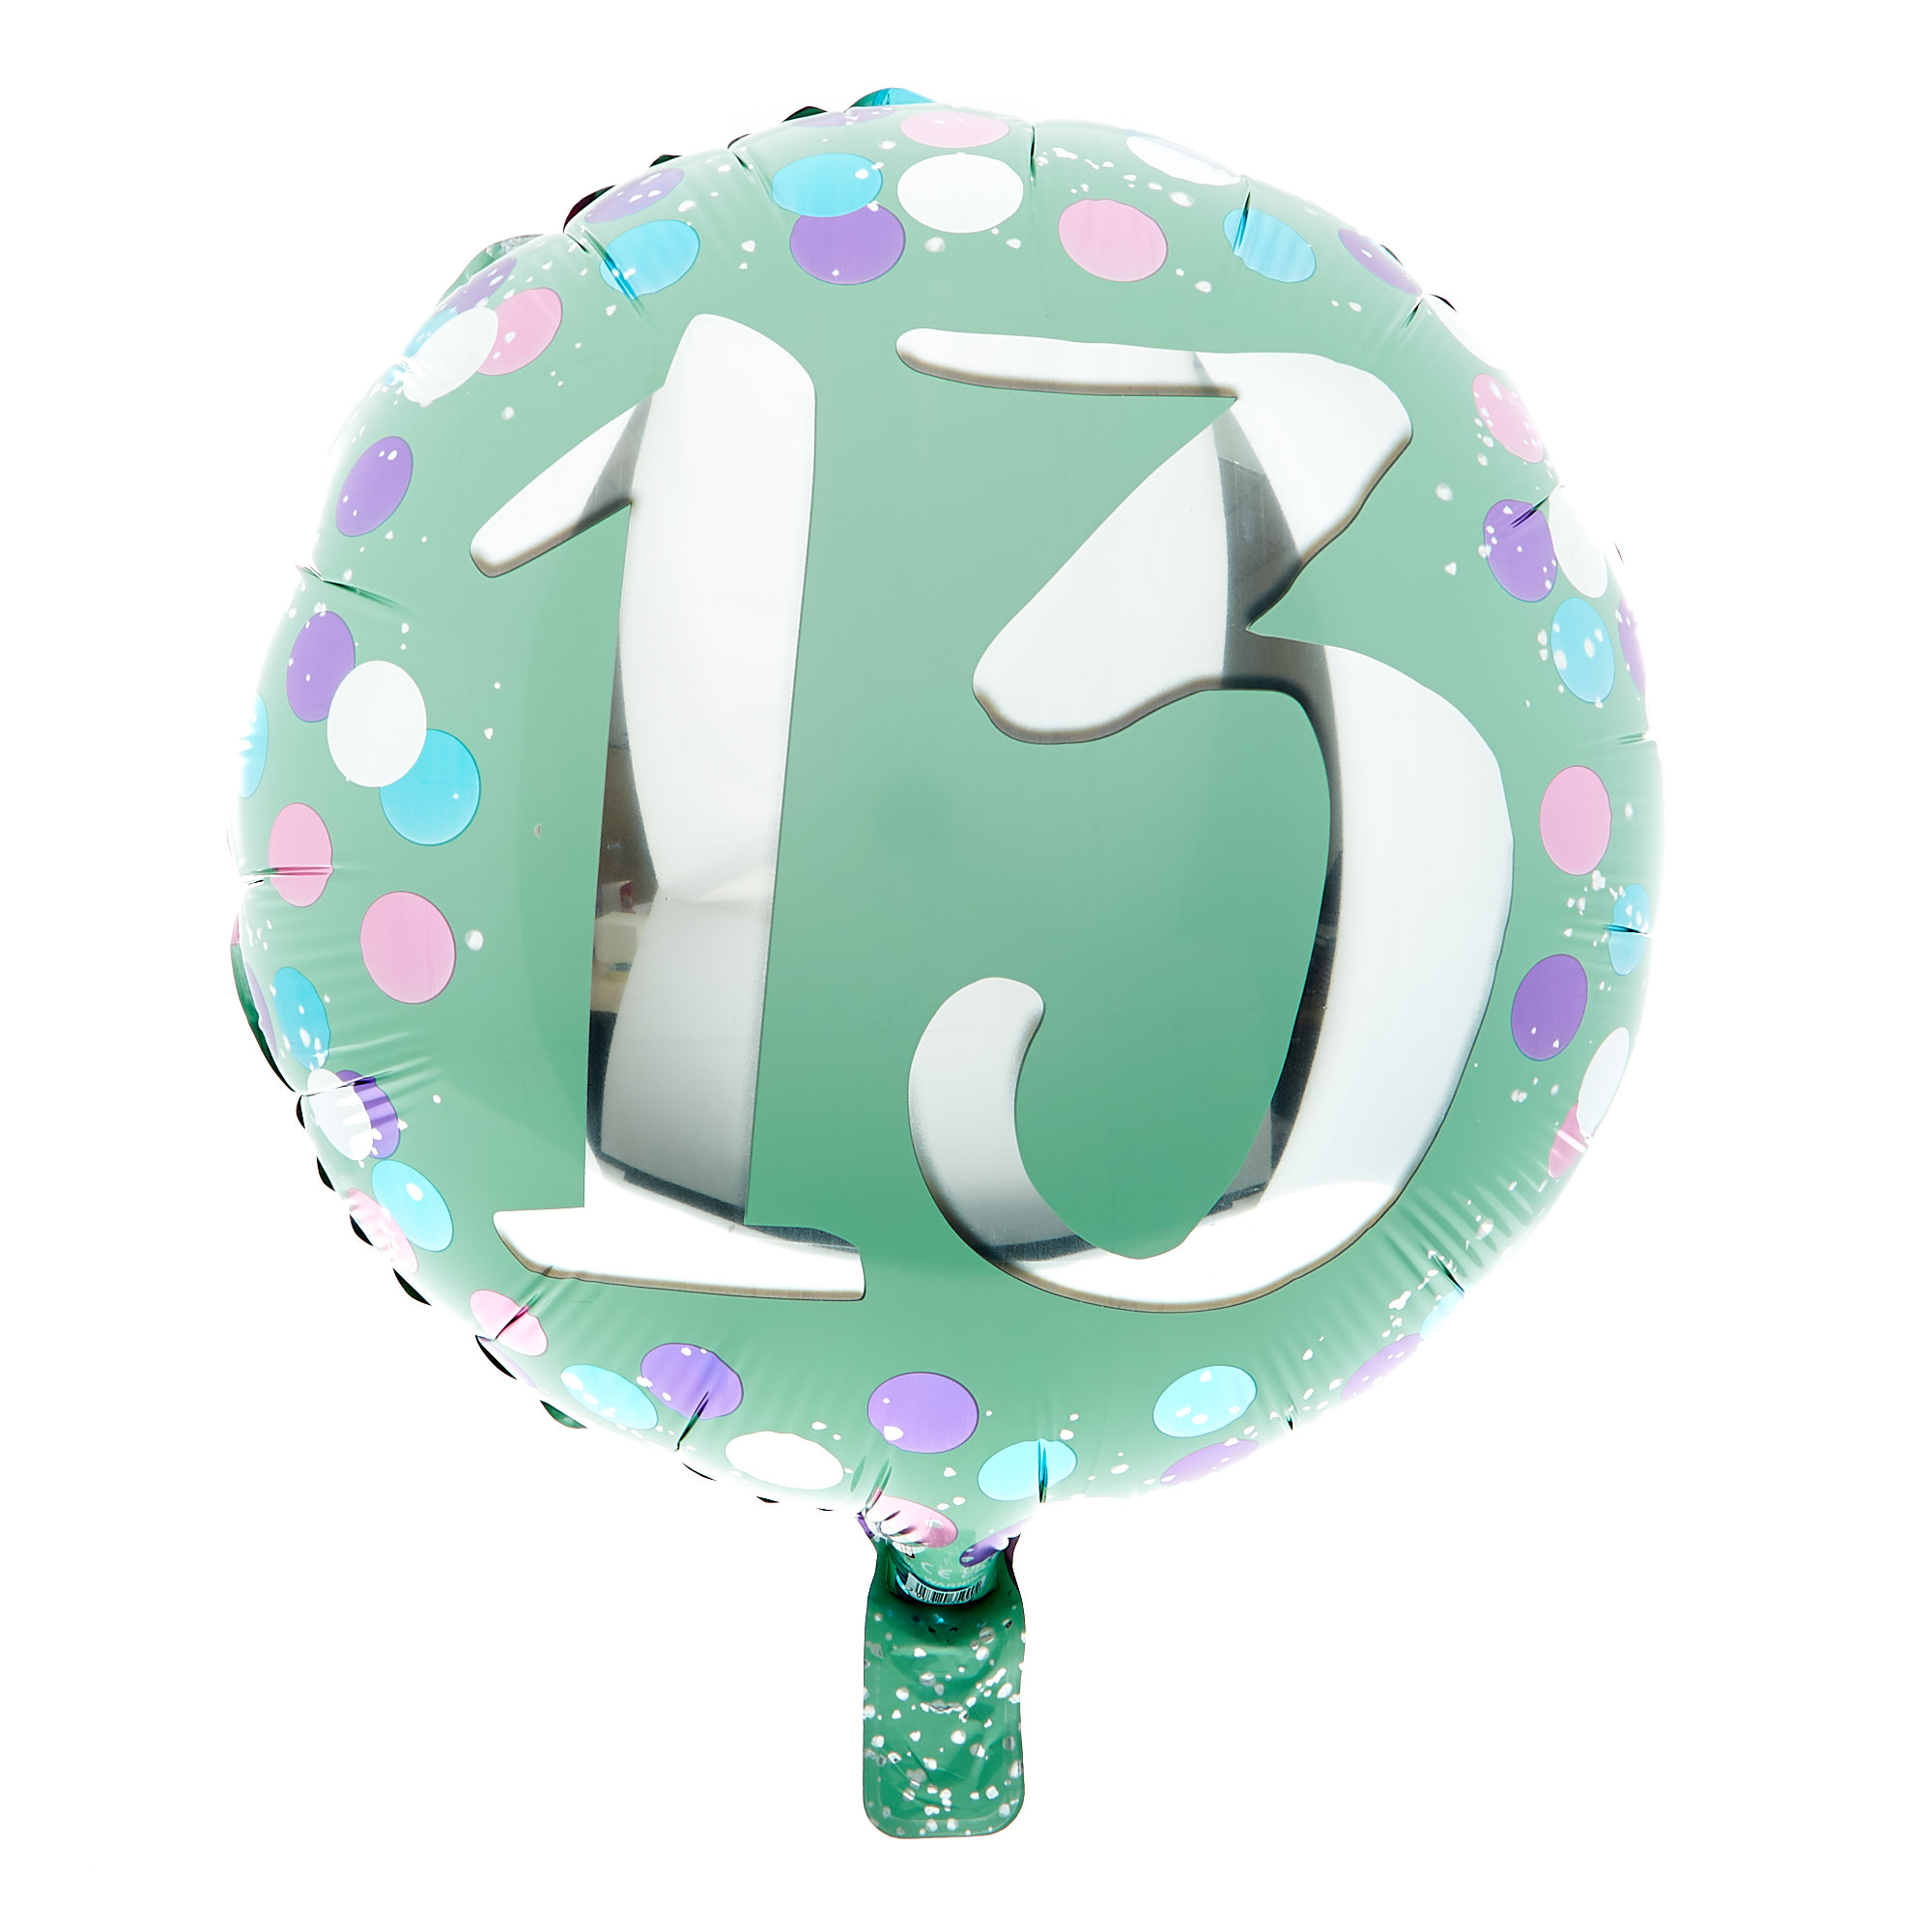 Mint Green 13th Birthday Balloon Bouquet - DELIVERED INFLATED!